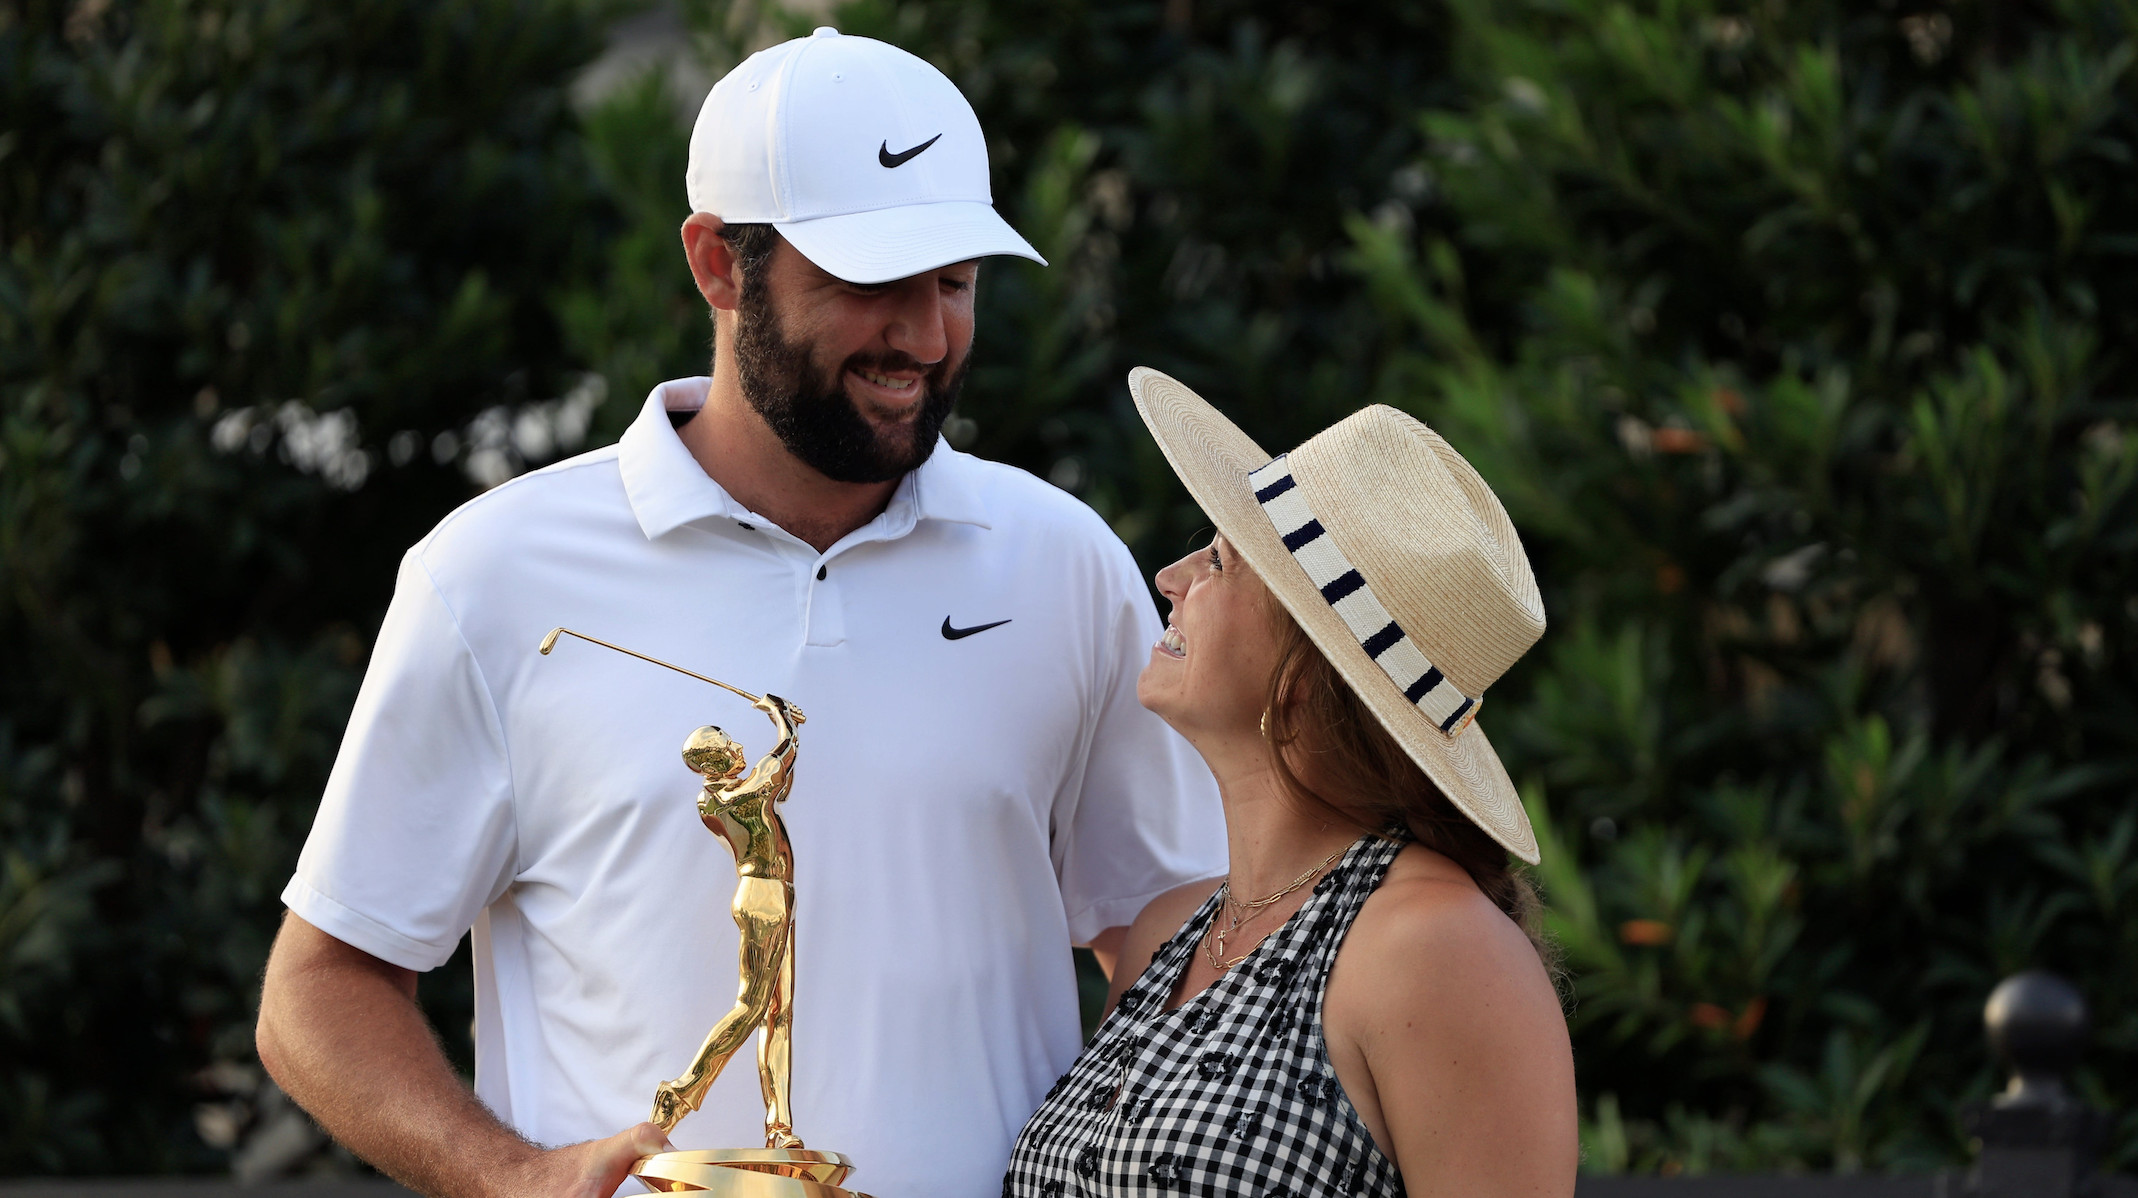 Scottie Scheffler looks to his wife Meredith Scudder as he poses for photos with the championship trophy after the fourth and final round of The Players Championship PGA golf tournament Sunday, March 17, 2024 at TPC Sawgrass in Ponte Vedra Beach, Fla. Scheffler won at 20 under par and is the first defending champion in the 50 year history of the event.